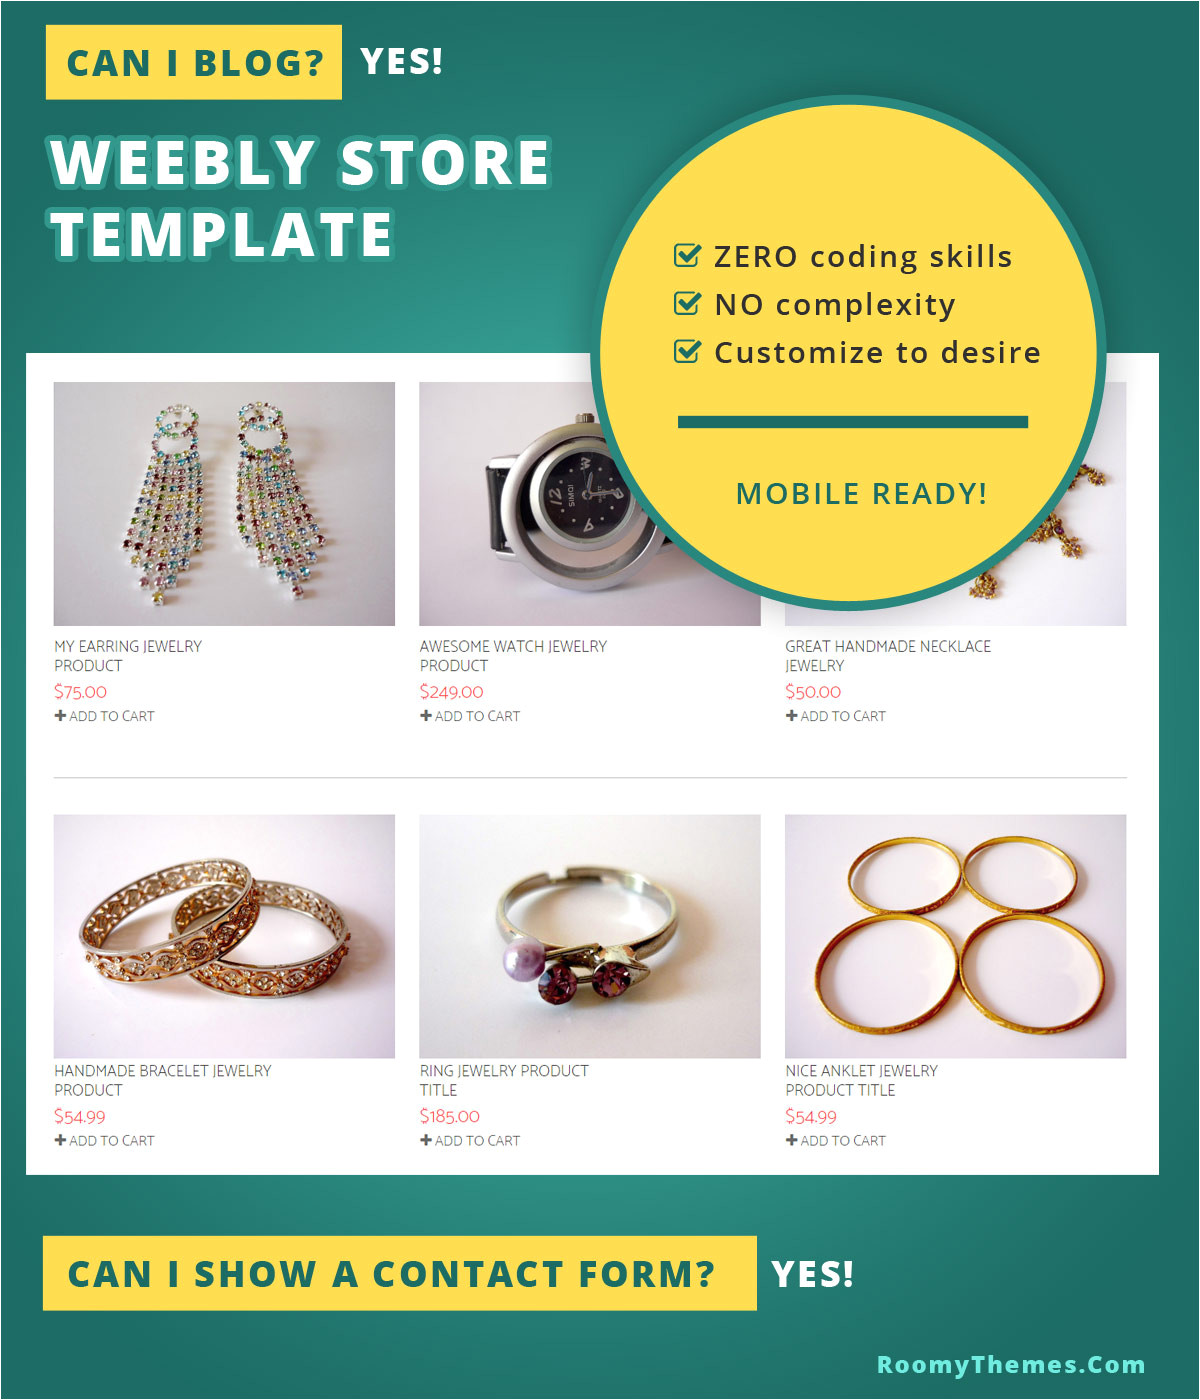 introducing onsale ecommerce weebly template